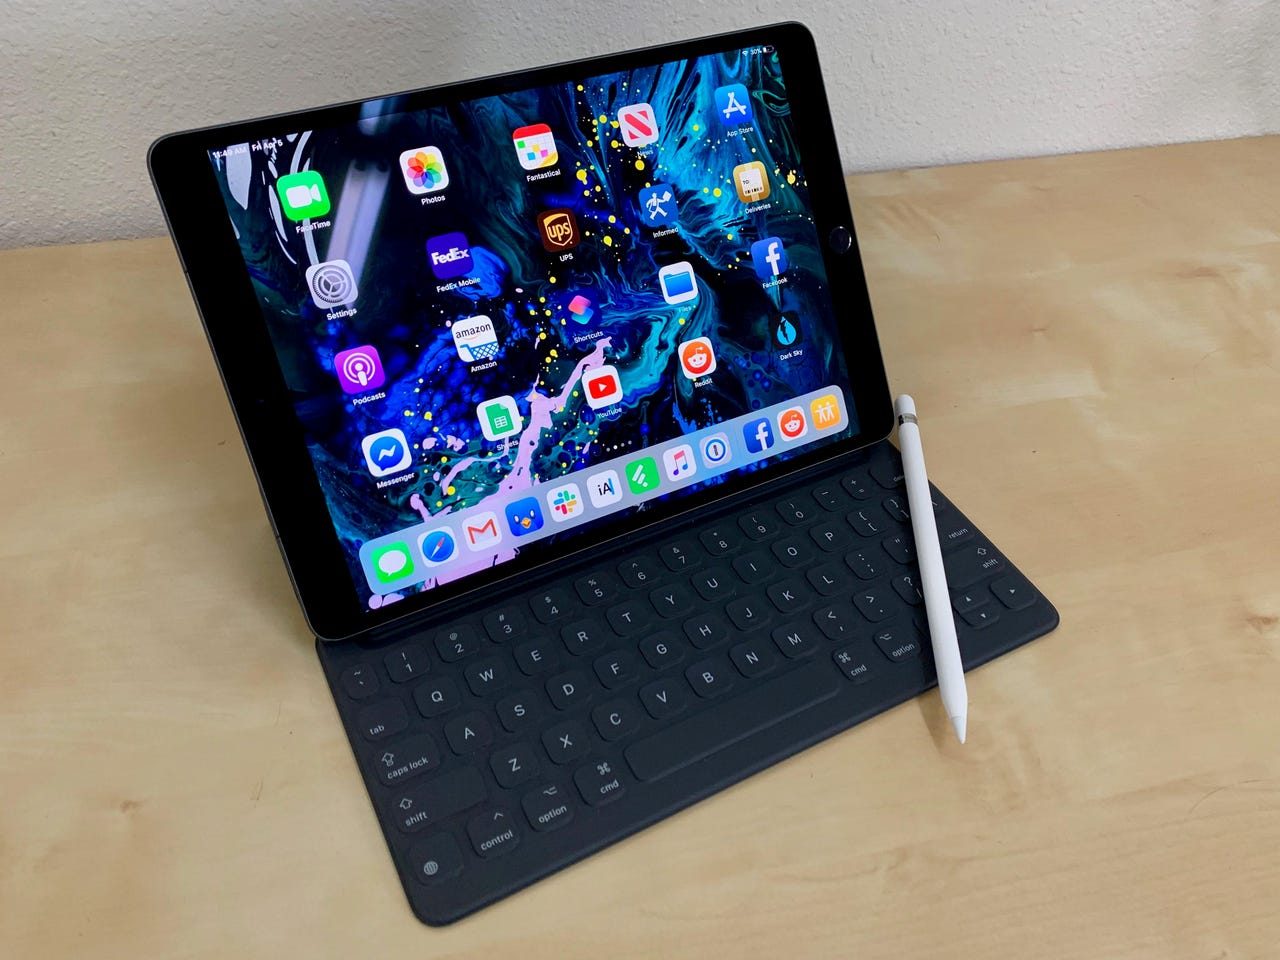 iPad Air 3 (2019) Review: The New Everyday iPad for Everyone